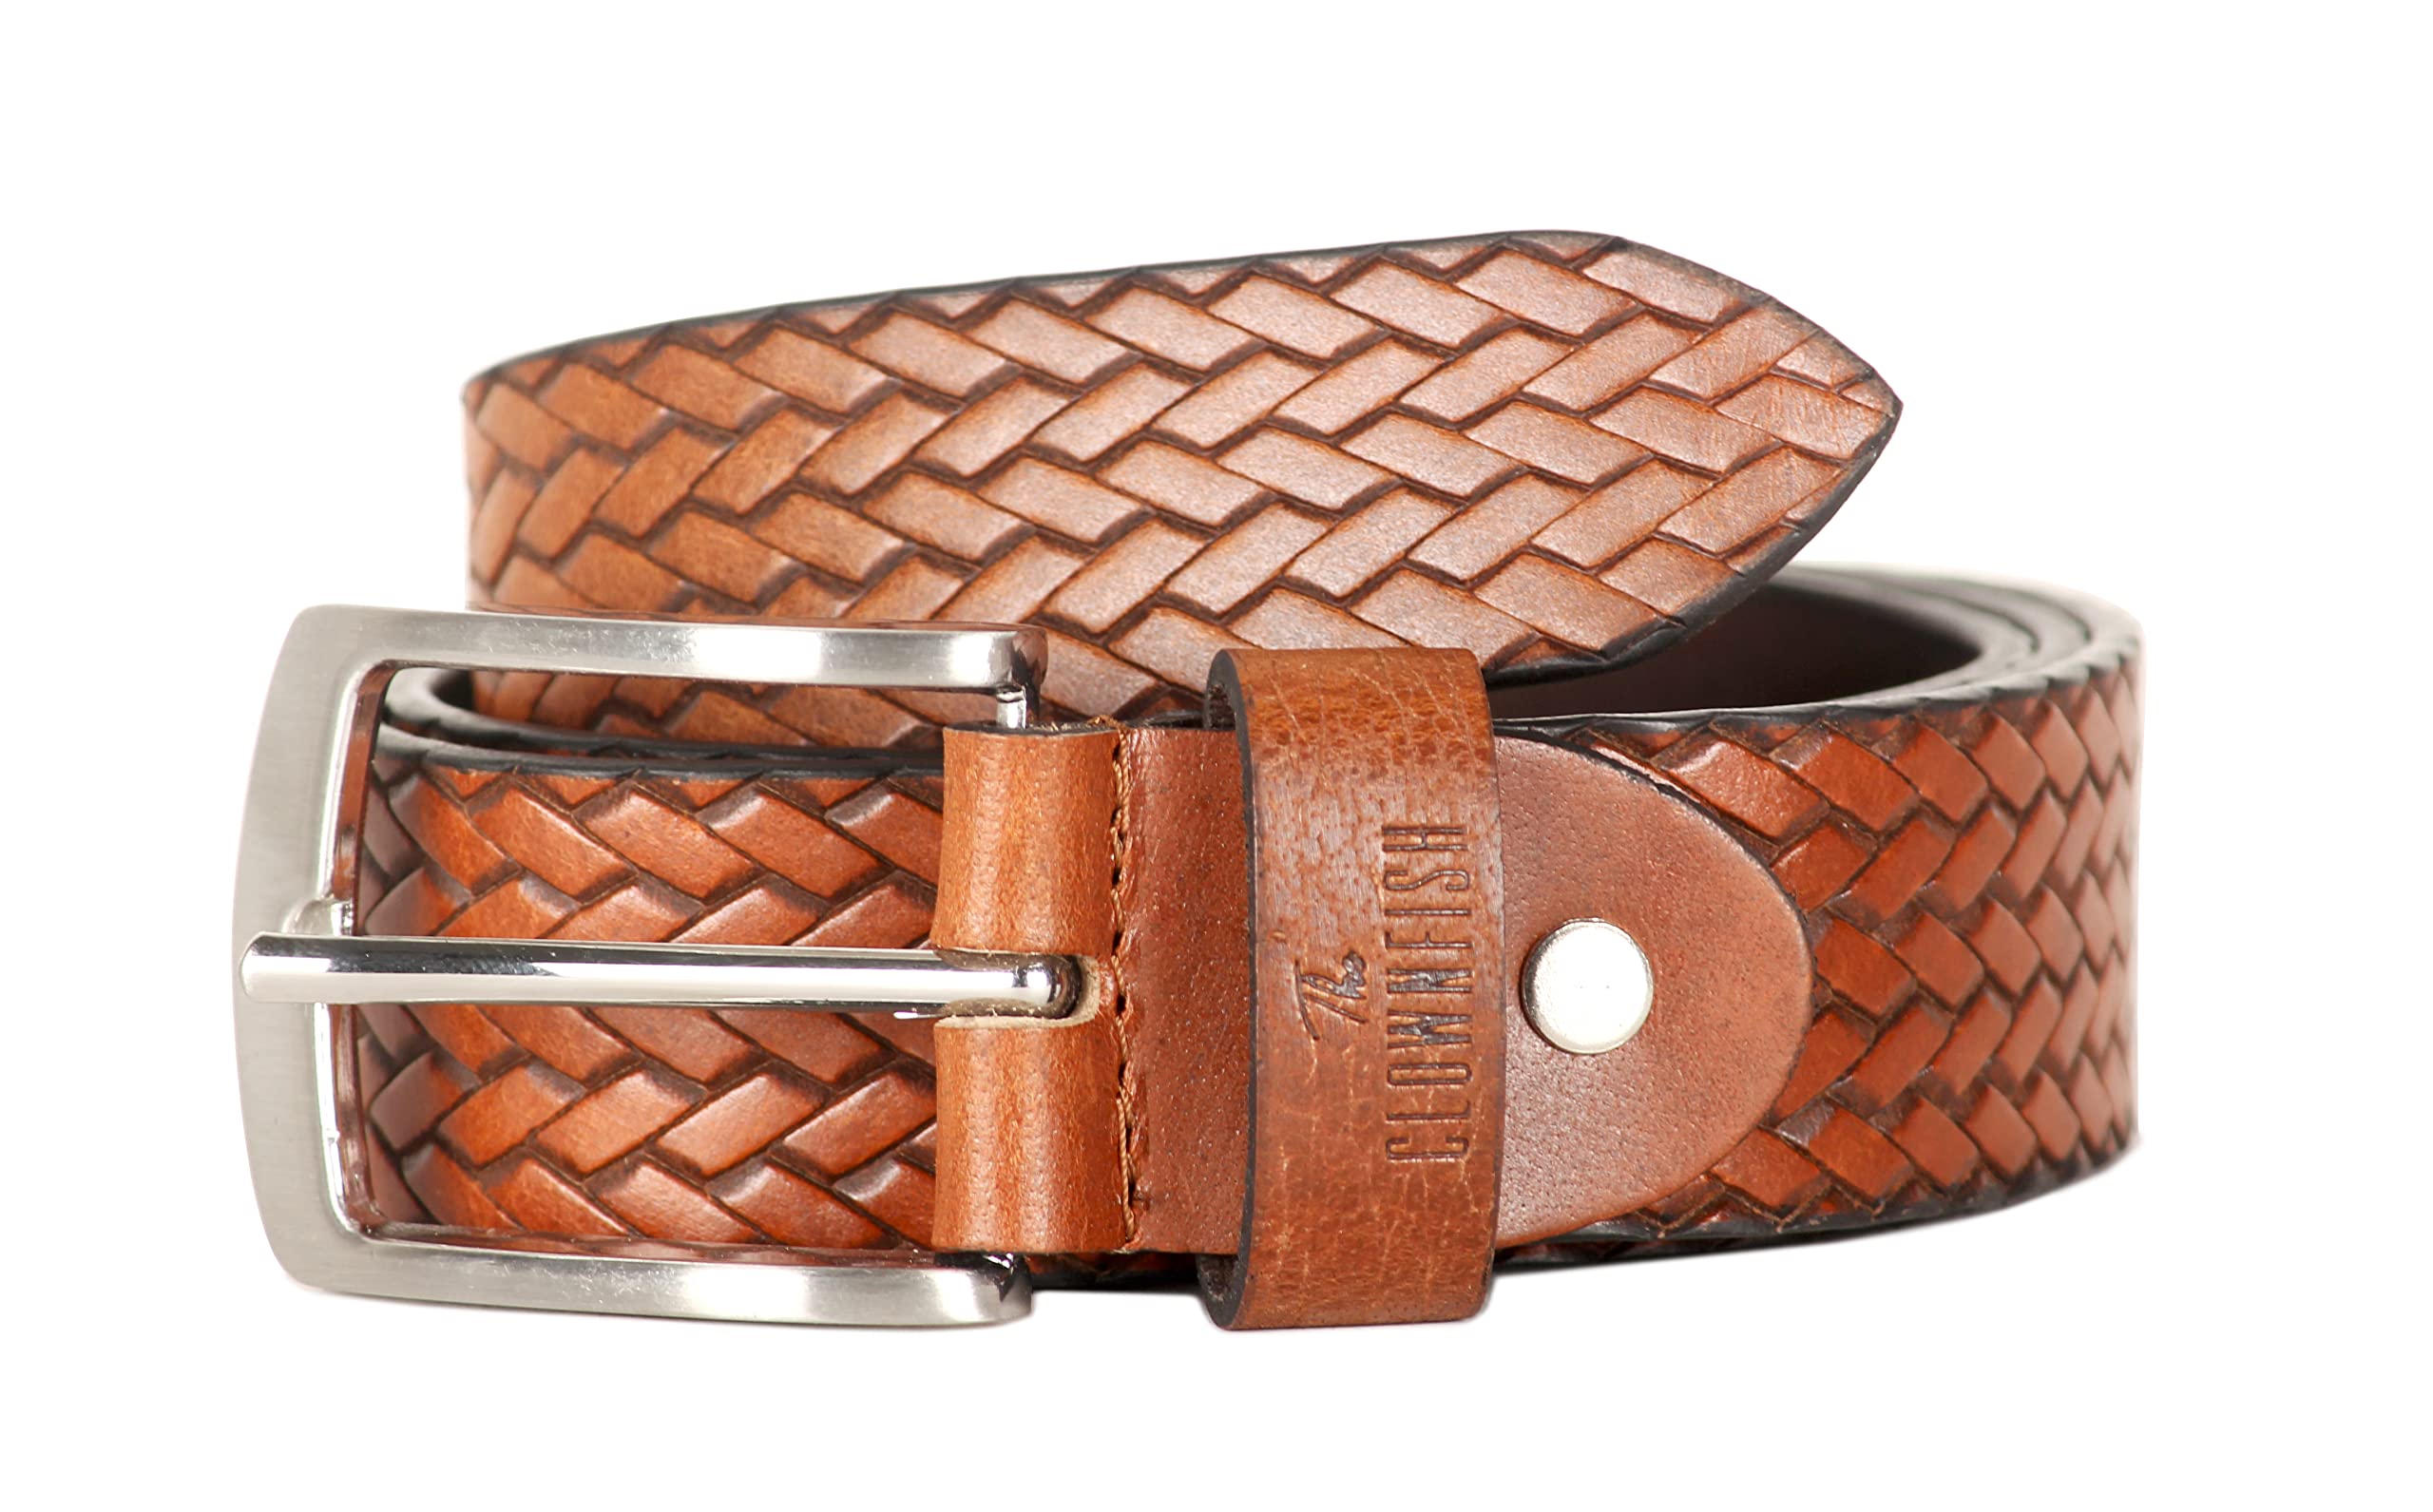 THE CLOWNFISH Men's Genuine Leather Belt with Textured/Embossed Design-Copper Brown (Size-32 inches)